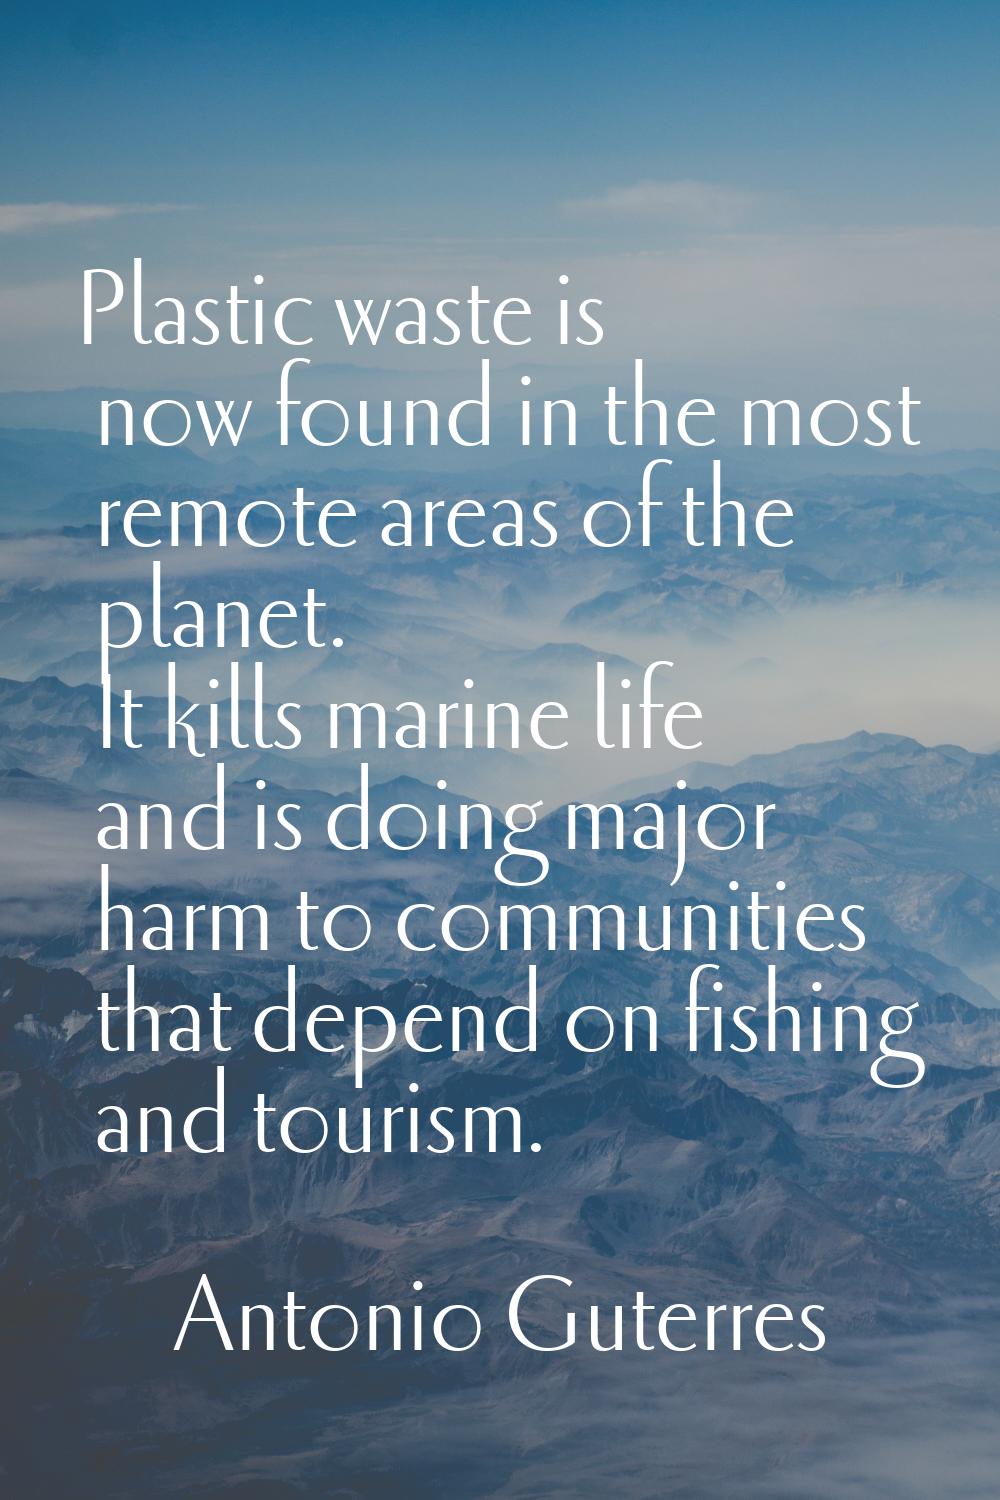 Plastic waste is now found in the most remote areas of the planet. It kills marine life and is doin